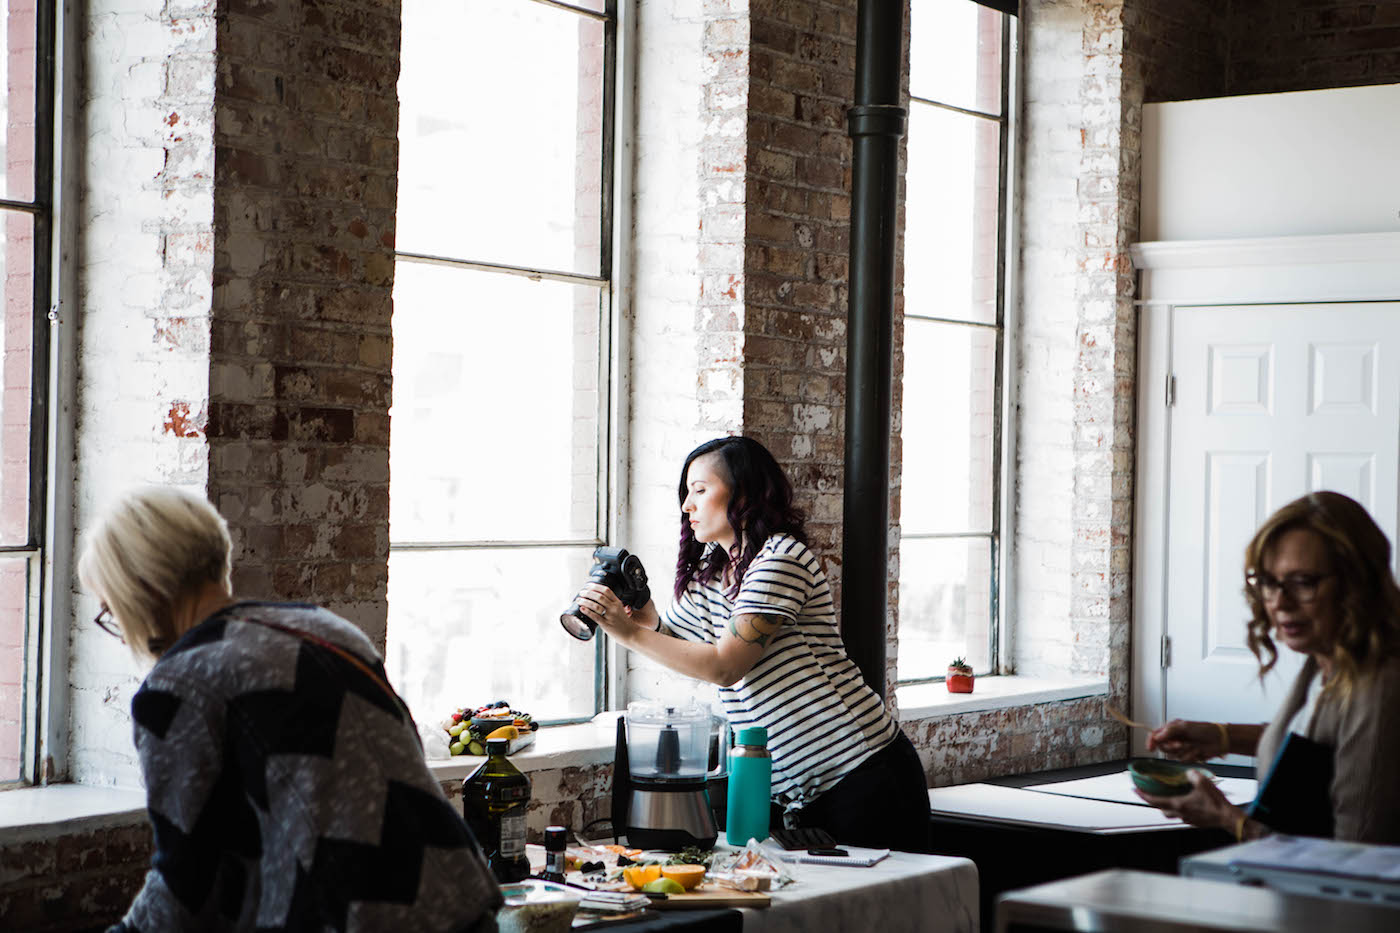 Tables set up by tall windows, filled with food photography layouts, women with cameras photographing food.